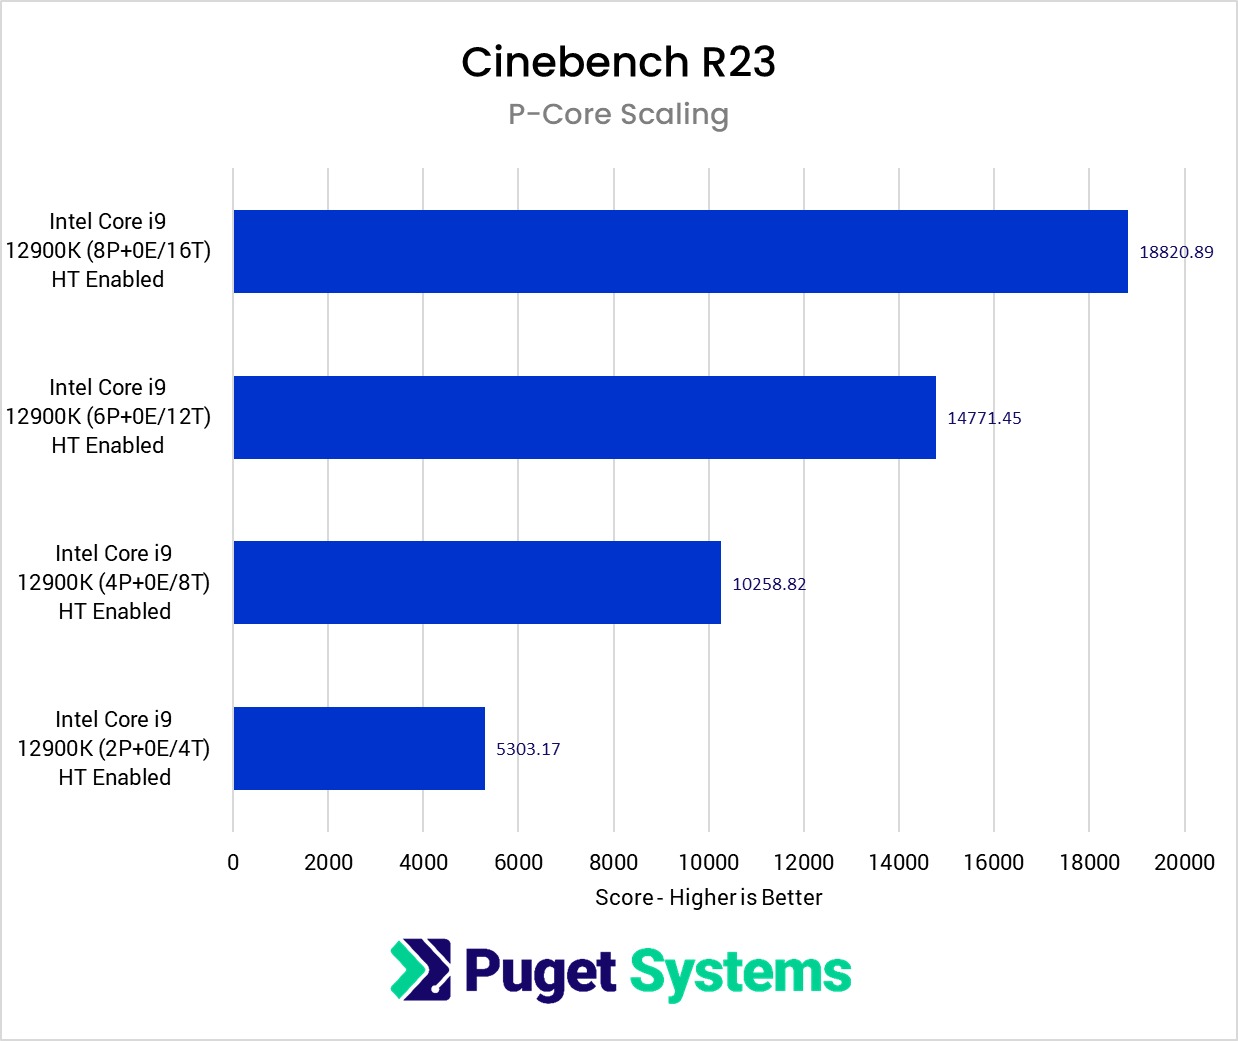 Graph of Cinebench scores on 2, 4, 6 and 8 P-Cores showing a fairly linear scaling. 